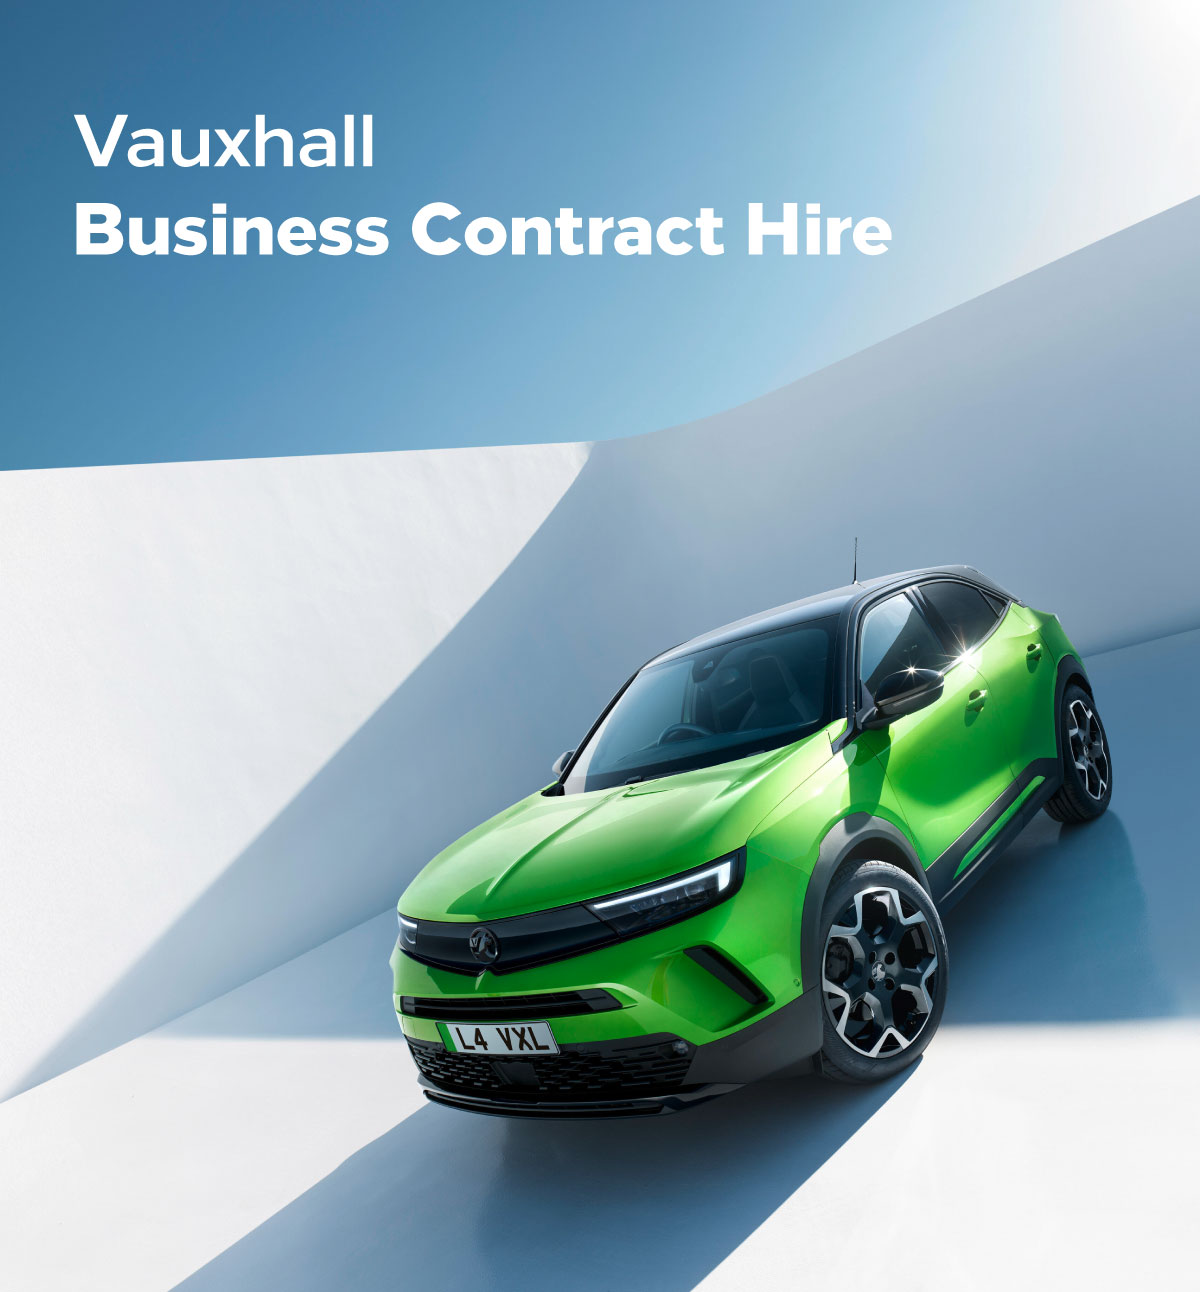 Vauxhall Business Contract